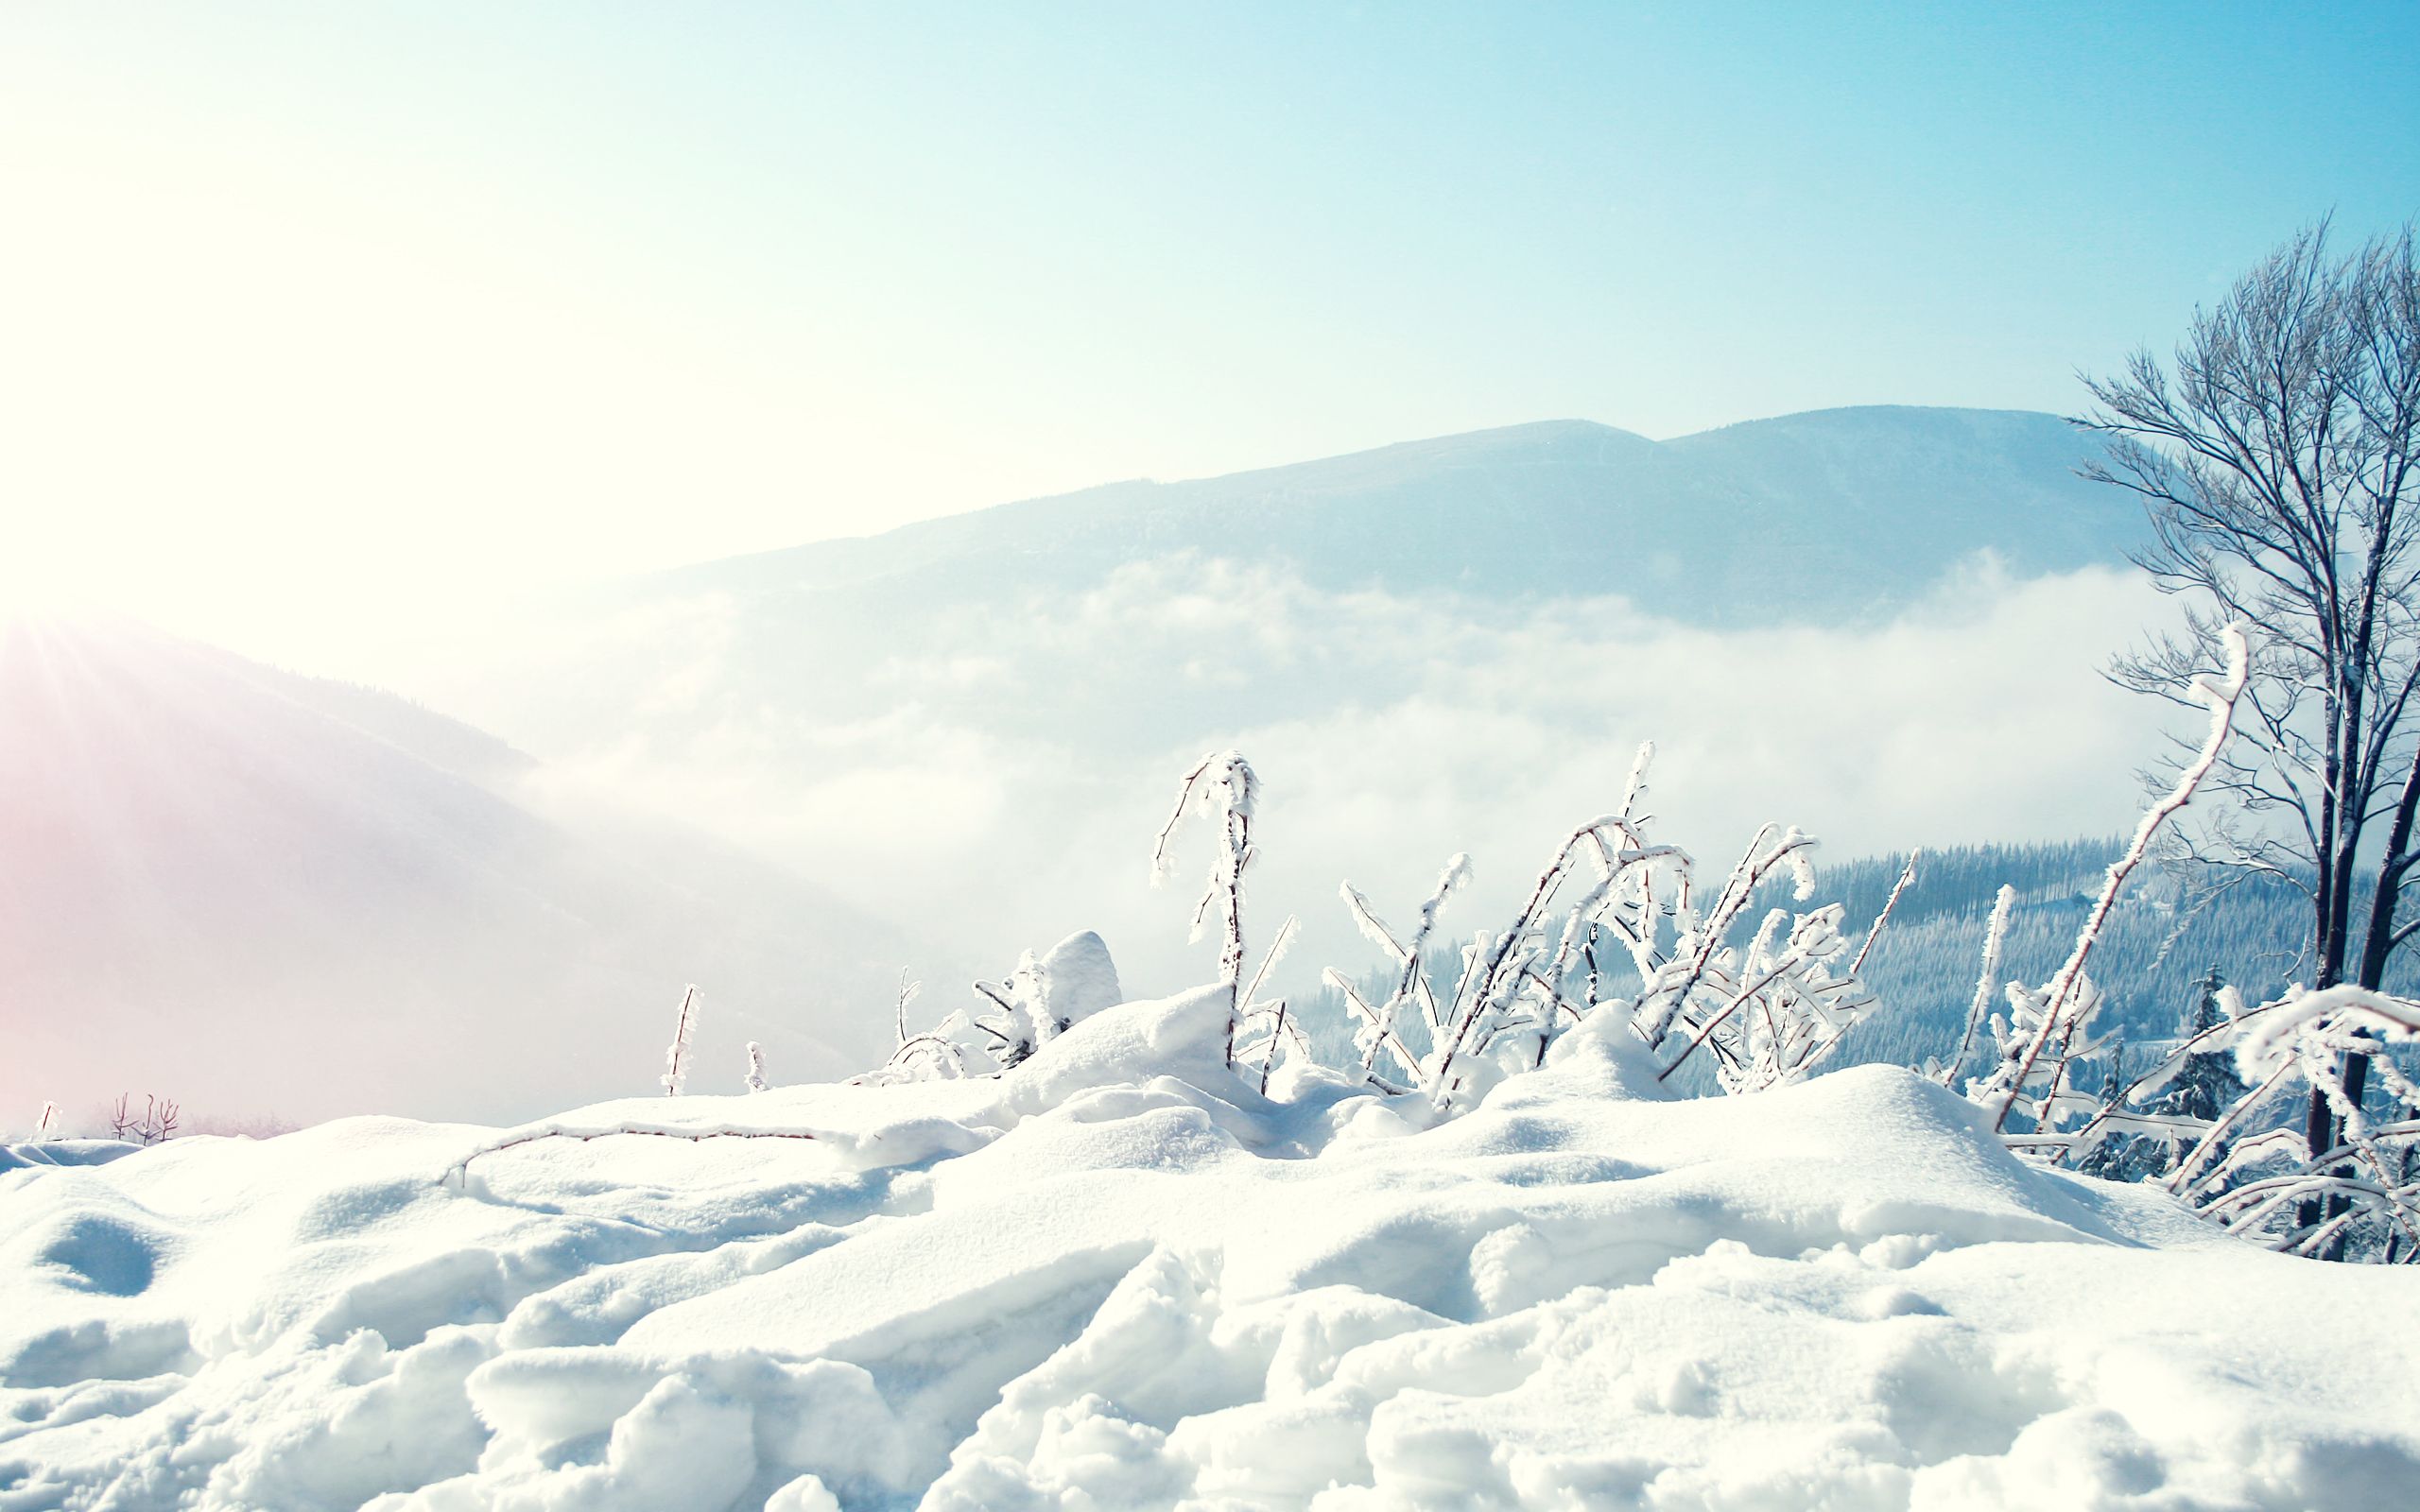 Anime Snow Landscape Wallpapers